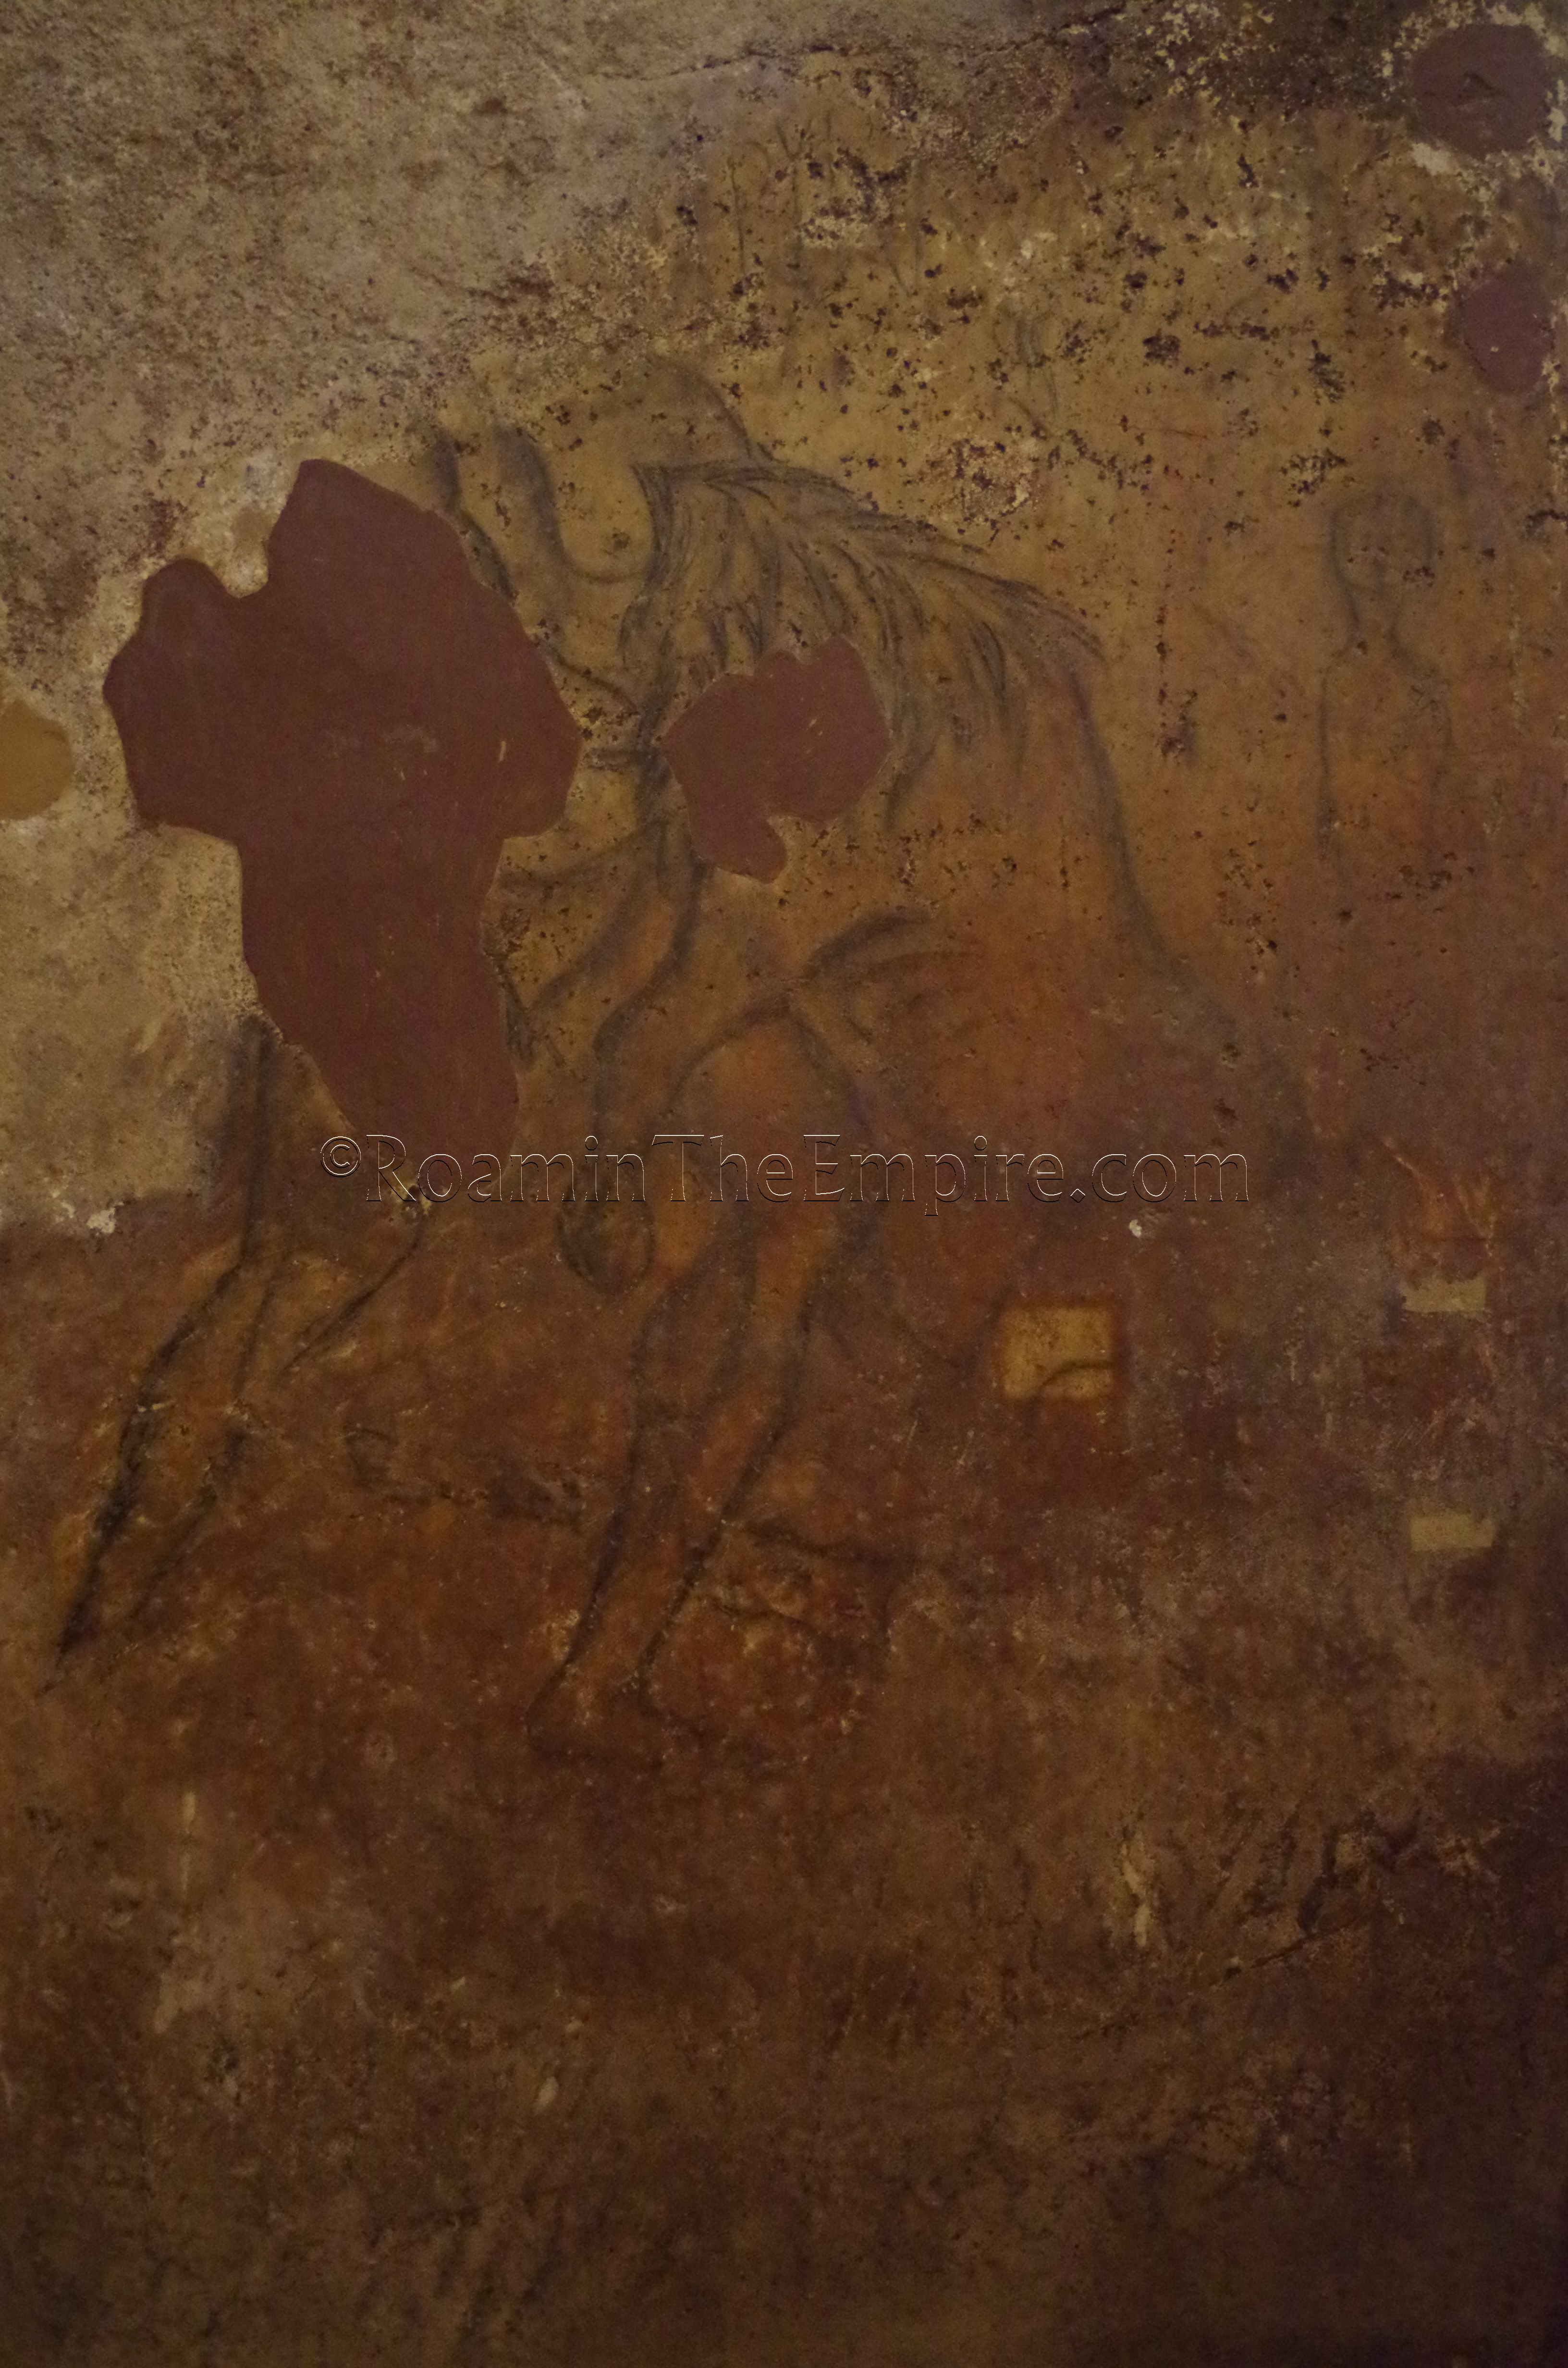 Image of Hercules fighting the Nemean Lion in the hypogeum of the Chiesa di San Salvatore.